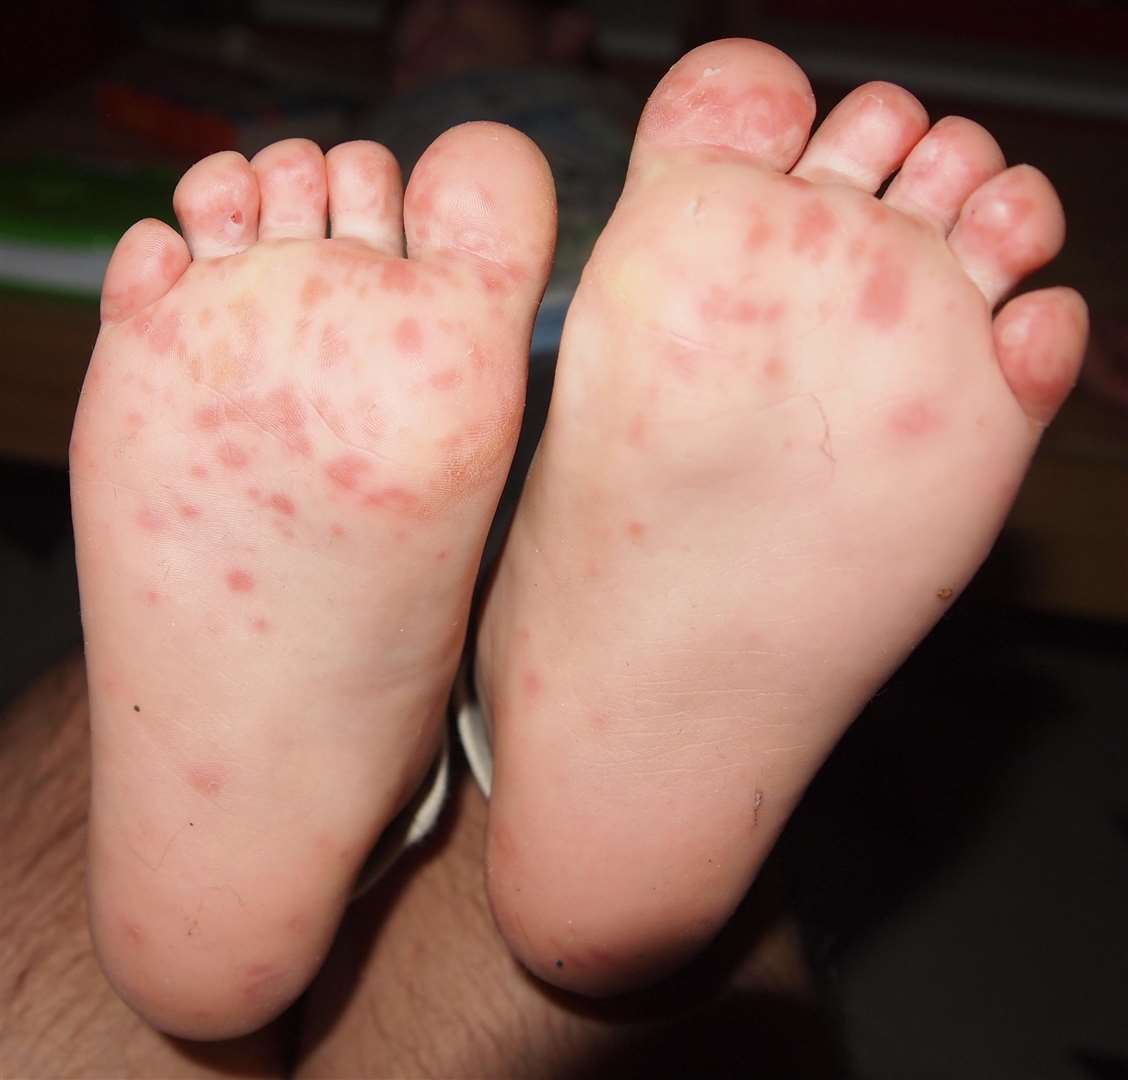 Hand, foot and mouth can cause a rash on a child's feet.